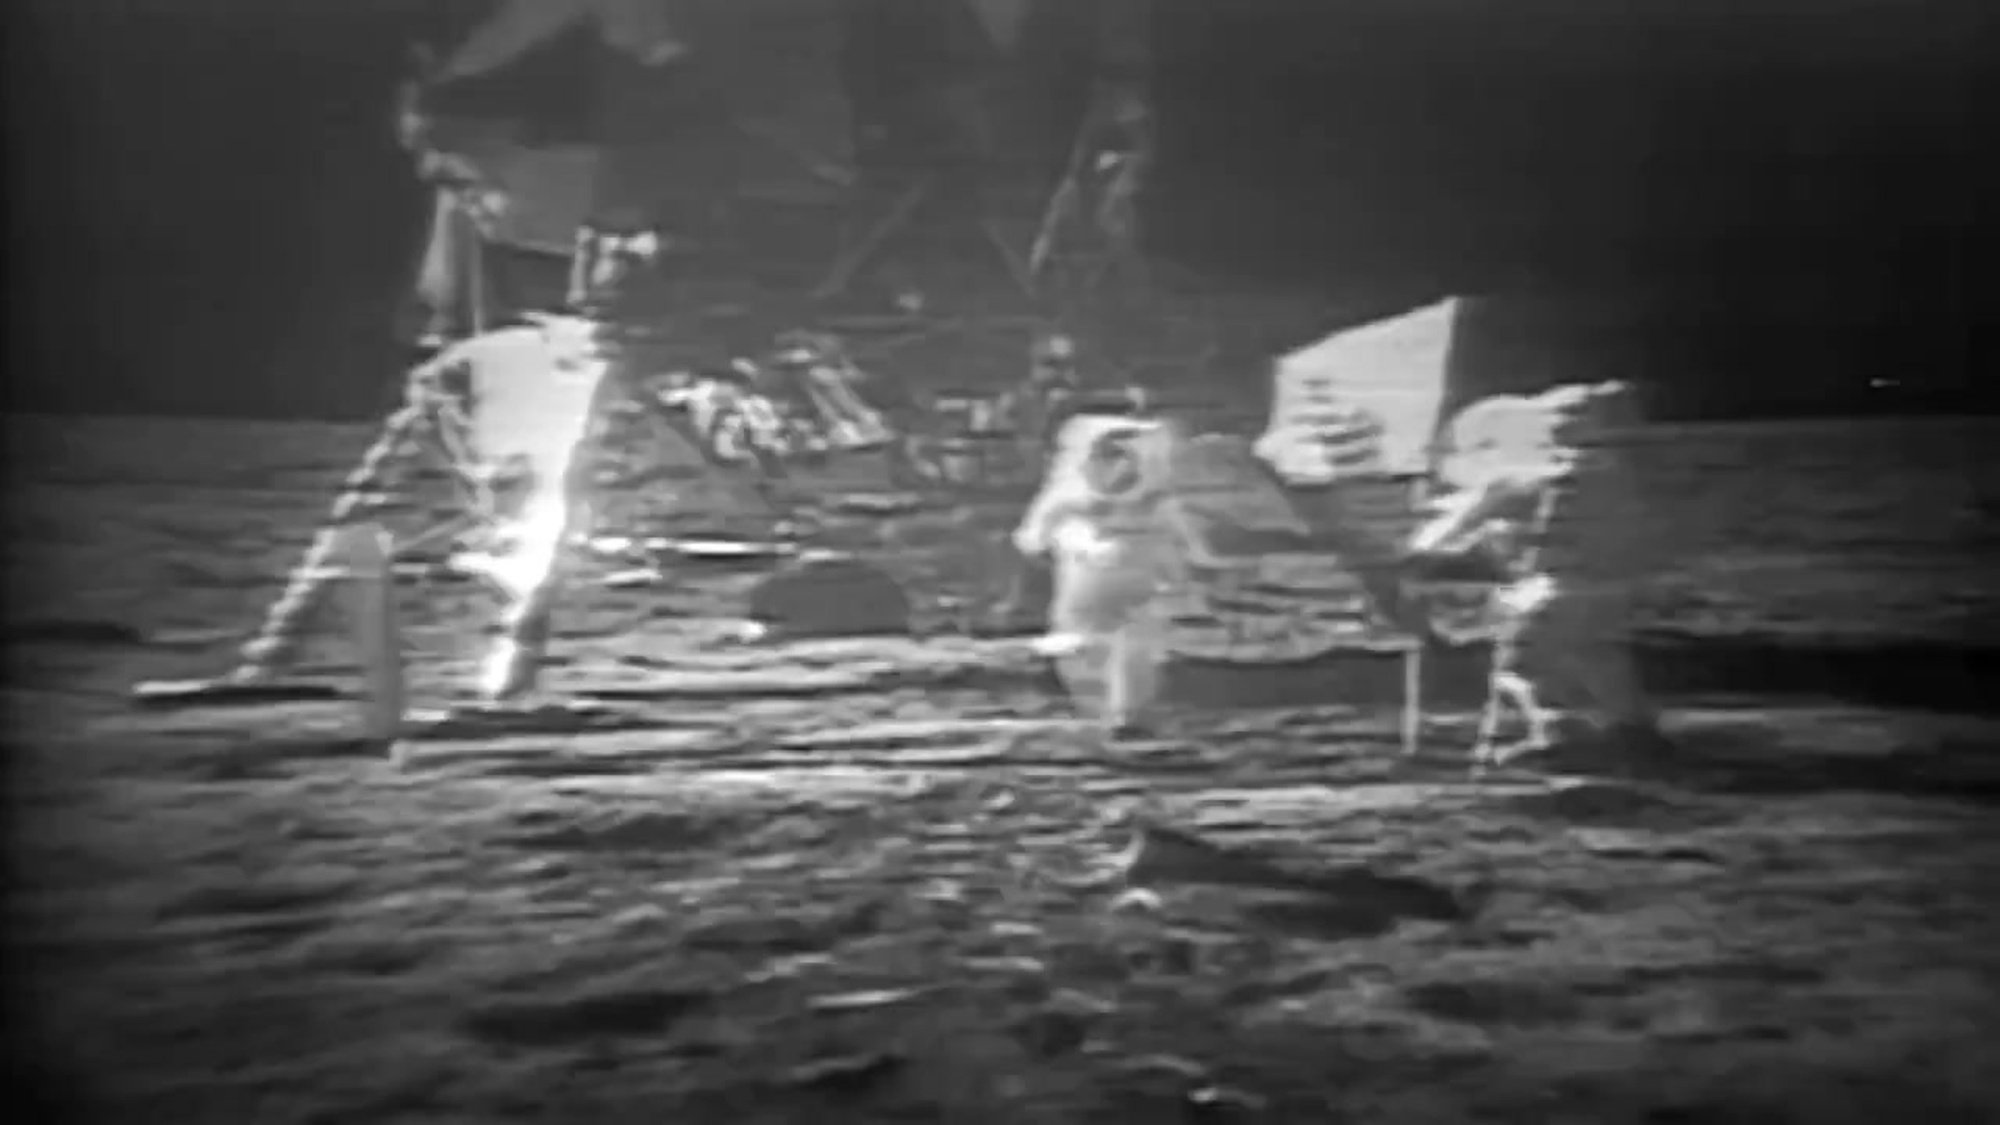 Astronauts walk on the moon during the Apollo 11 mission